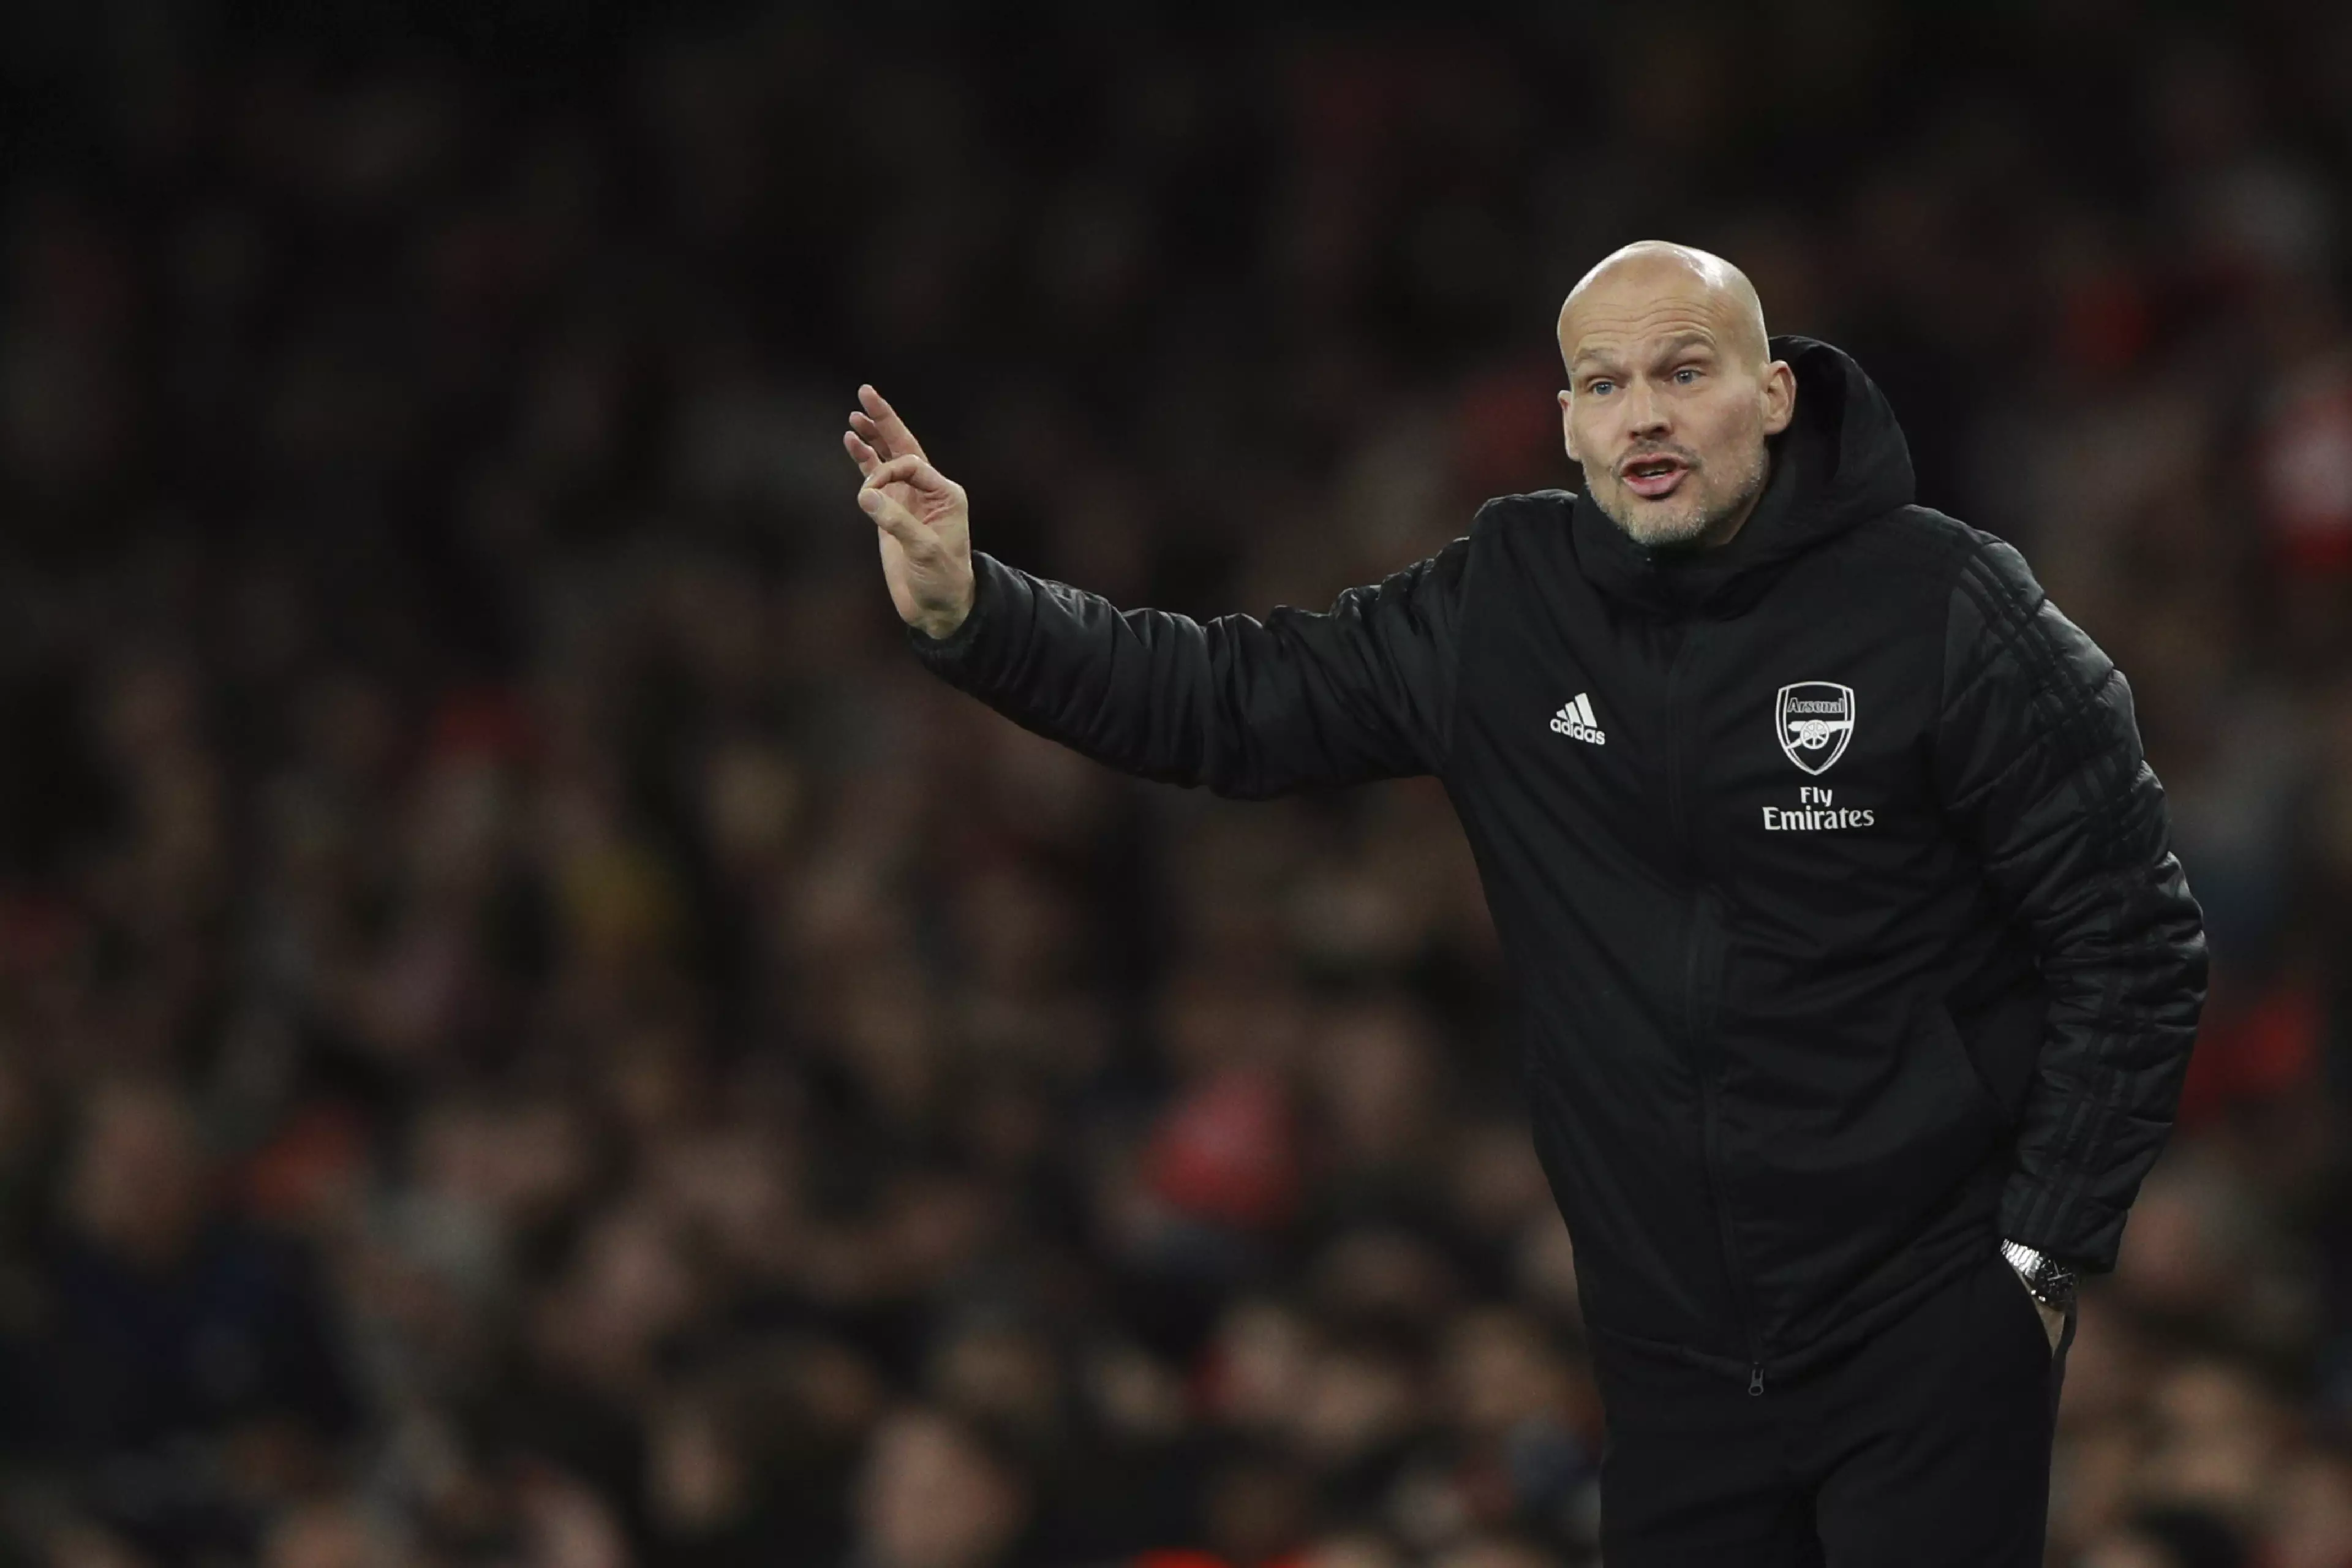 Ljungberg has been in charge for nearly a month. Image: PA Images